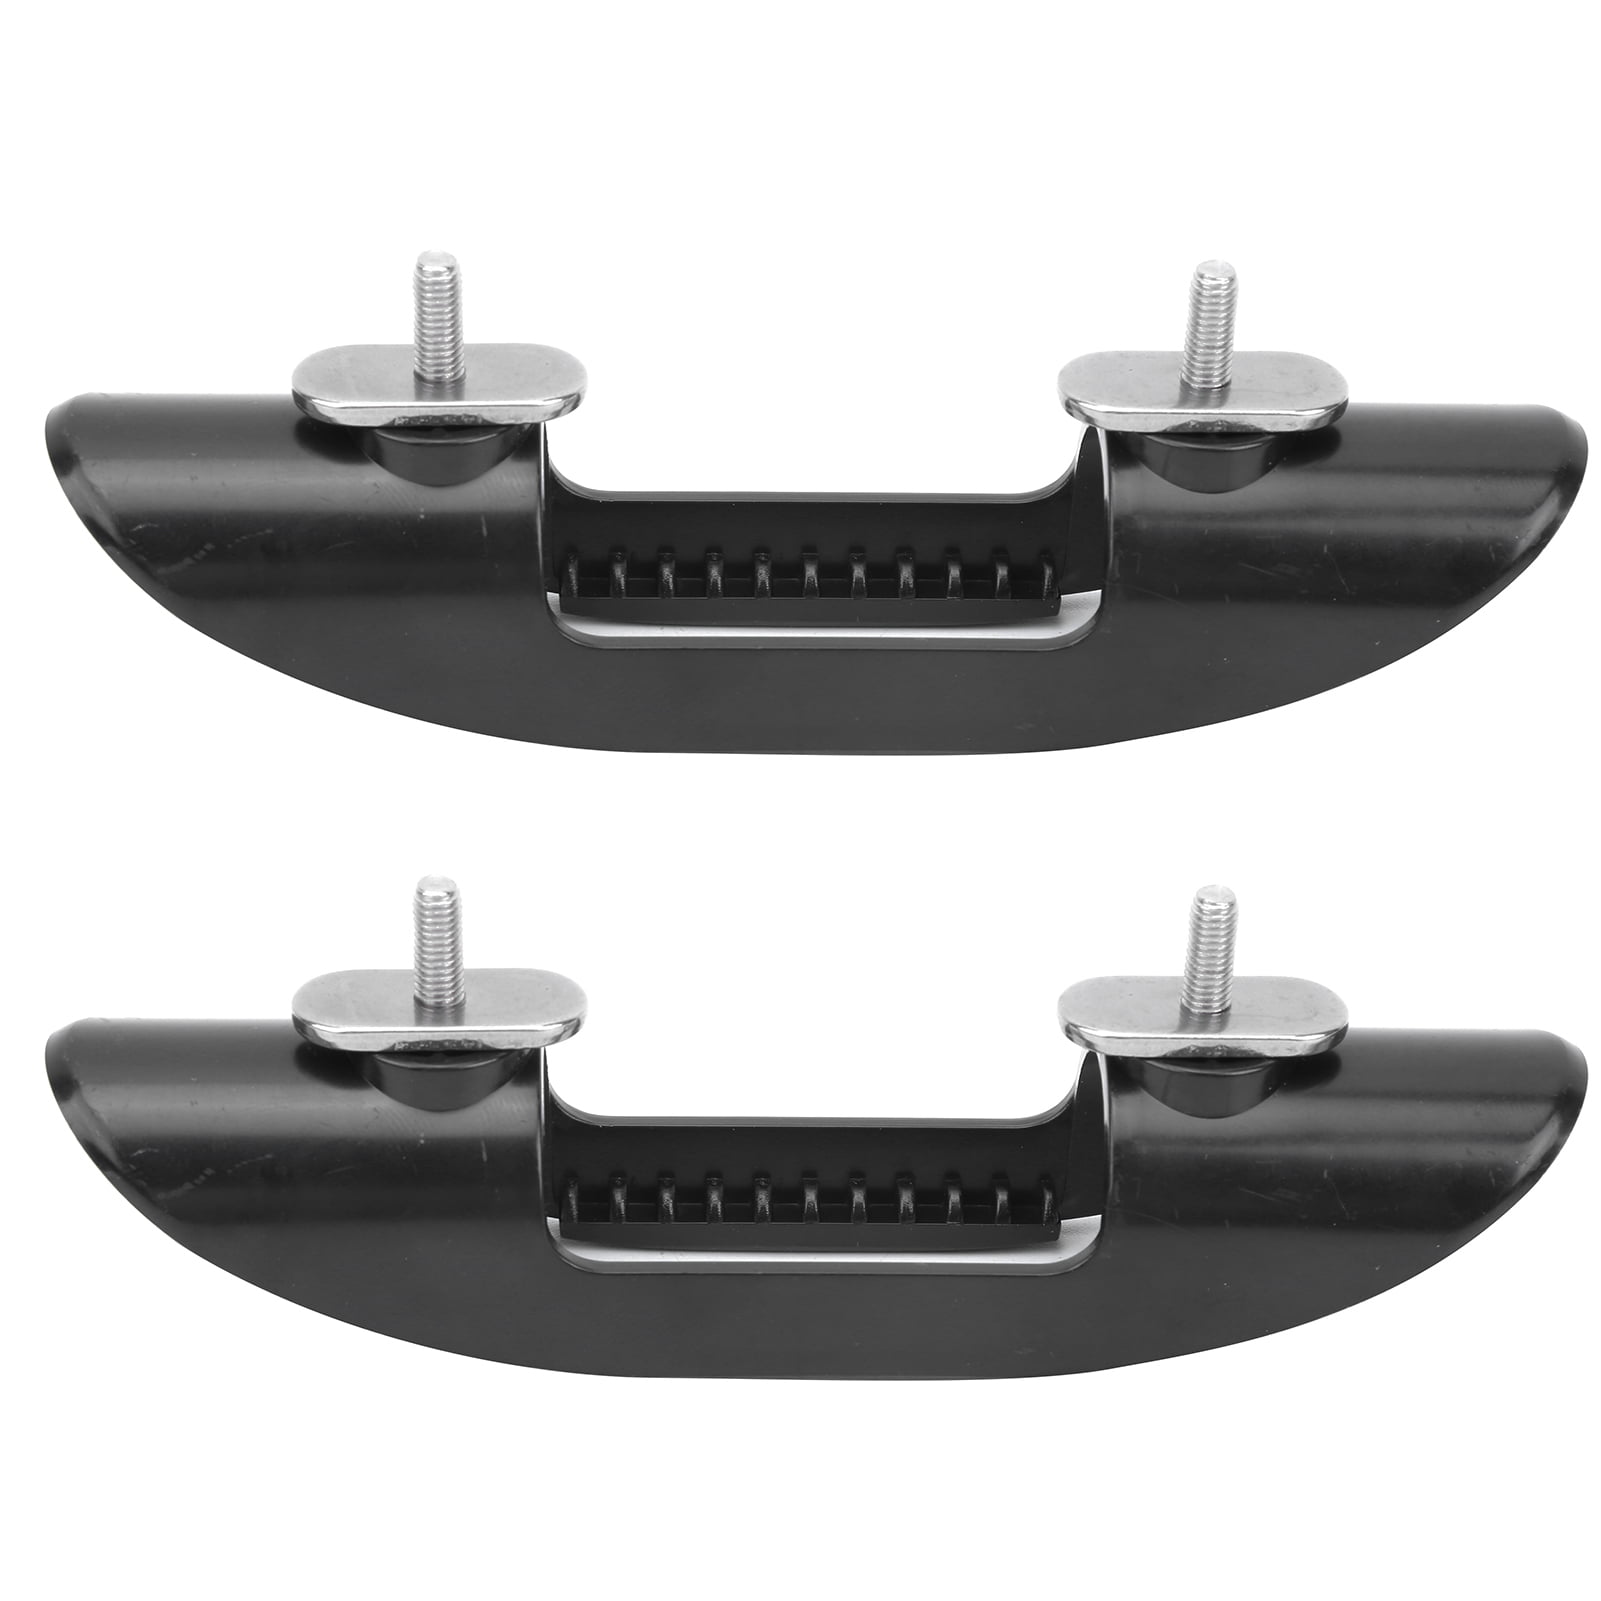 2 Pieces Marine Kayak Paddle Clip Holder Keeper Canoe Boat Mount Accessories 